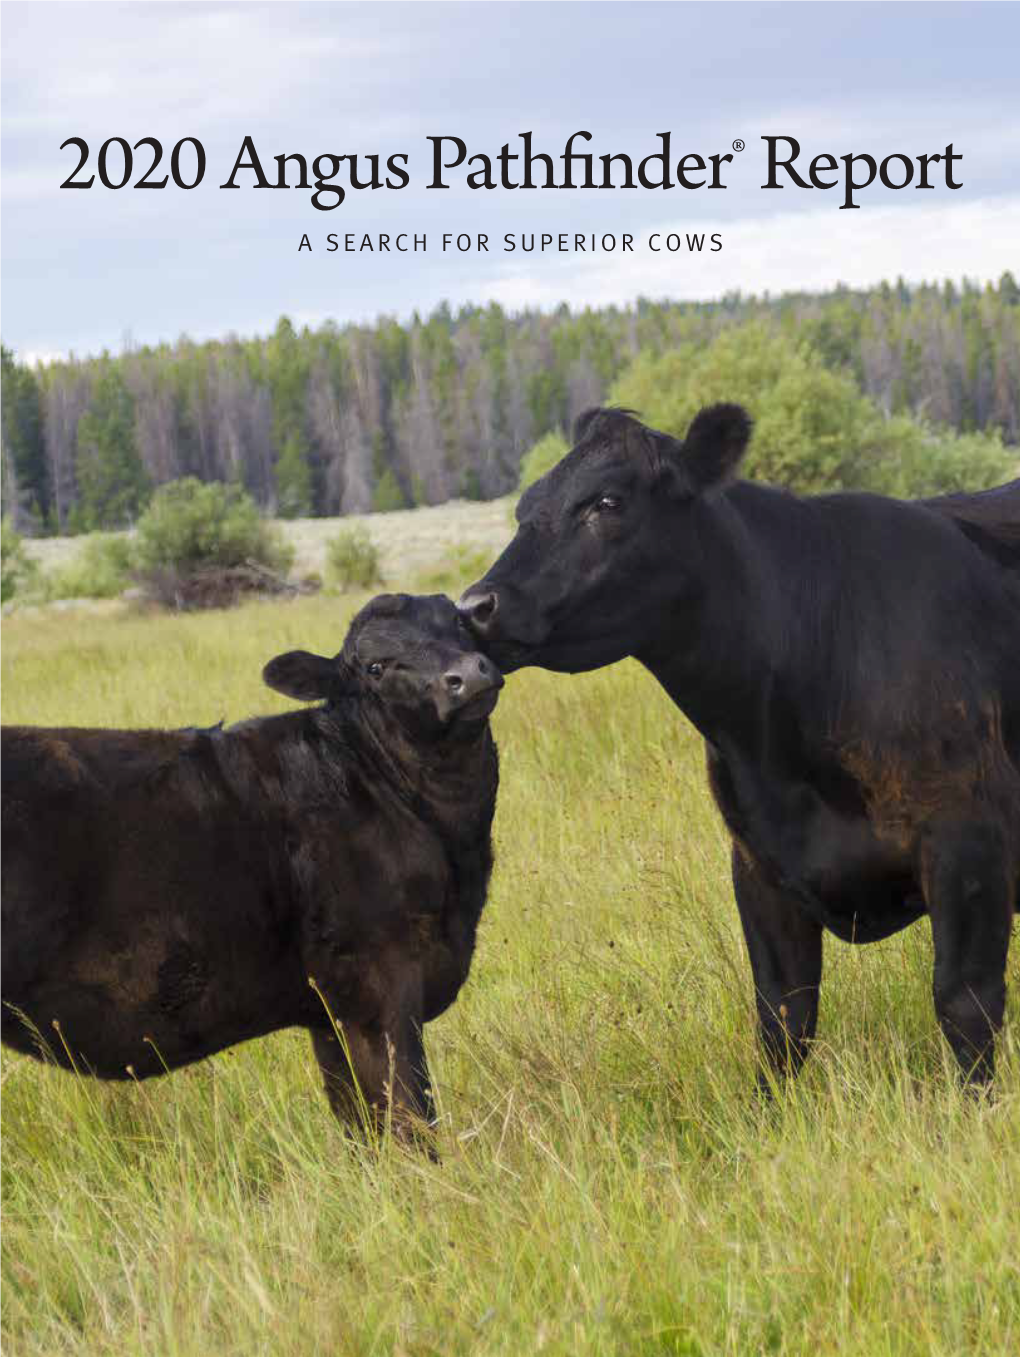 2020 Angus Pathfinder® Report a SEARCH for SUPERIOR COWS 2020 Angus Pathfinder® Report a SEARCH for SUPERIOR COWS